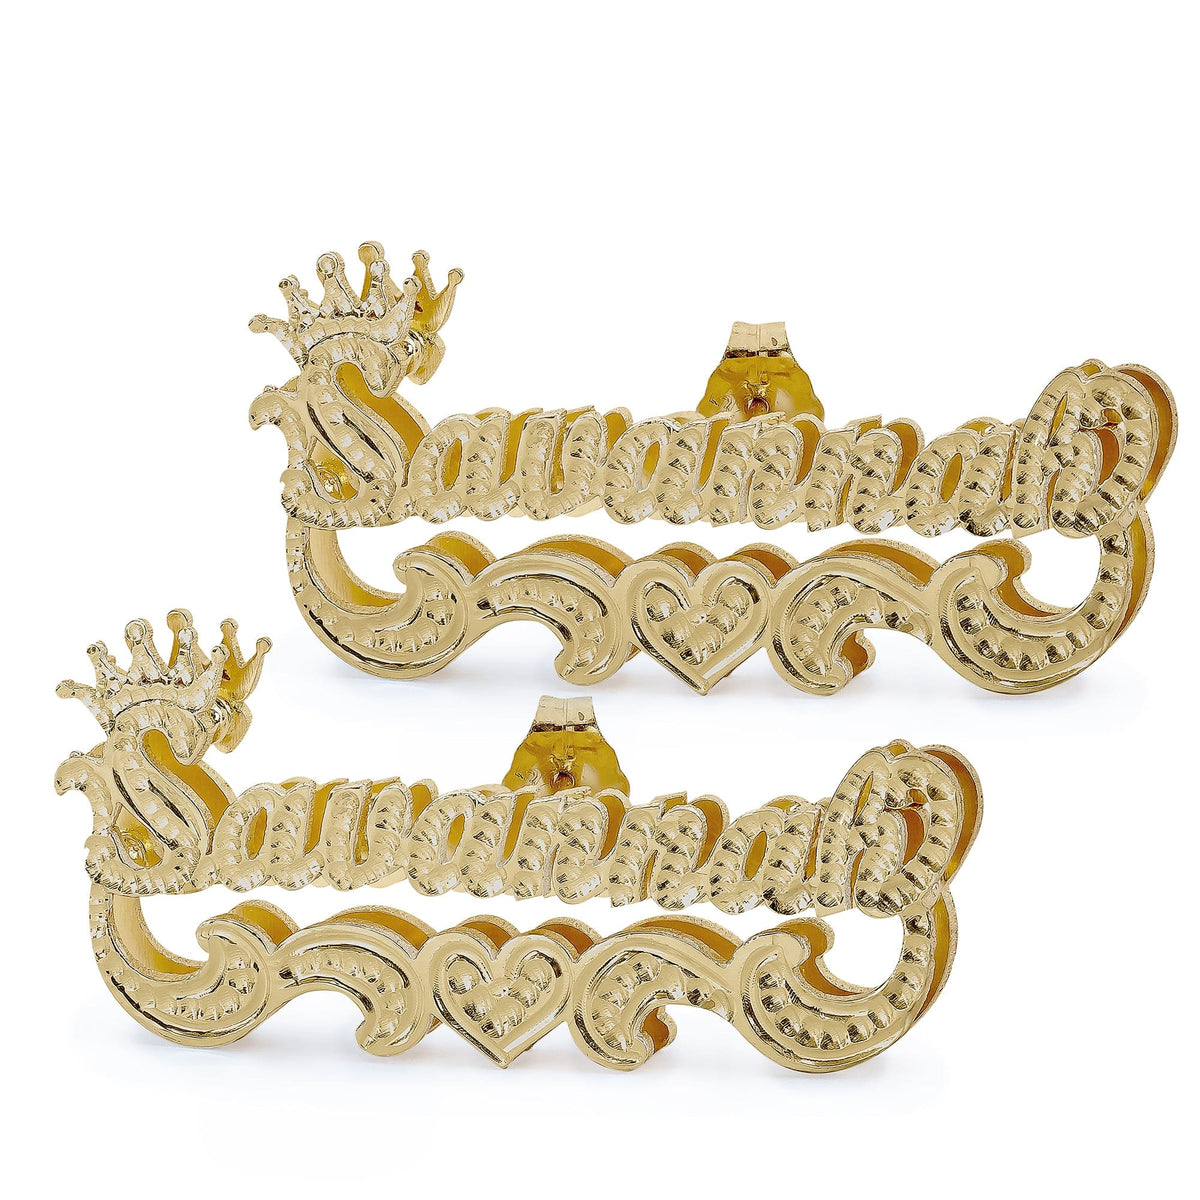 14K Gold over Sterling Silver Name Stud Earrings with Crown and Beaded Finish